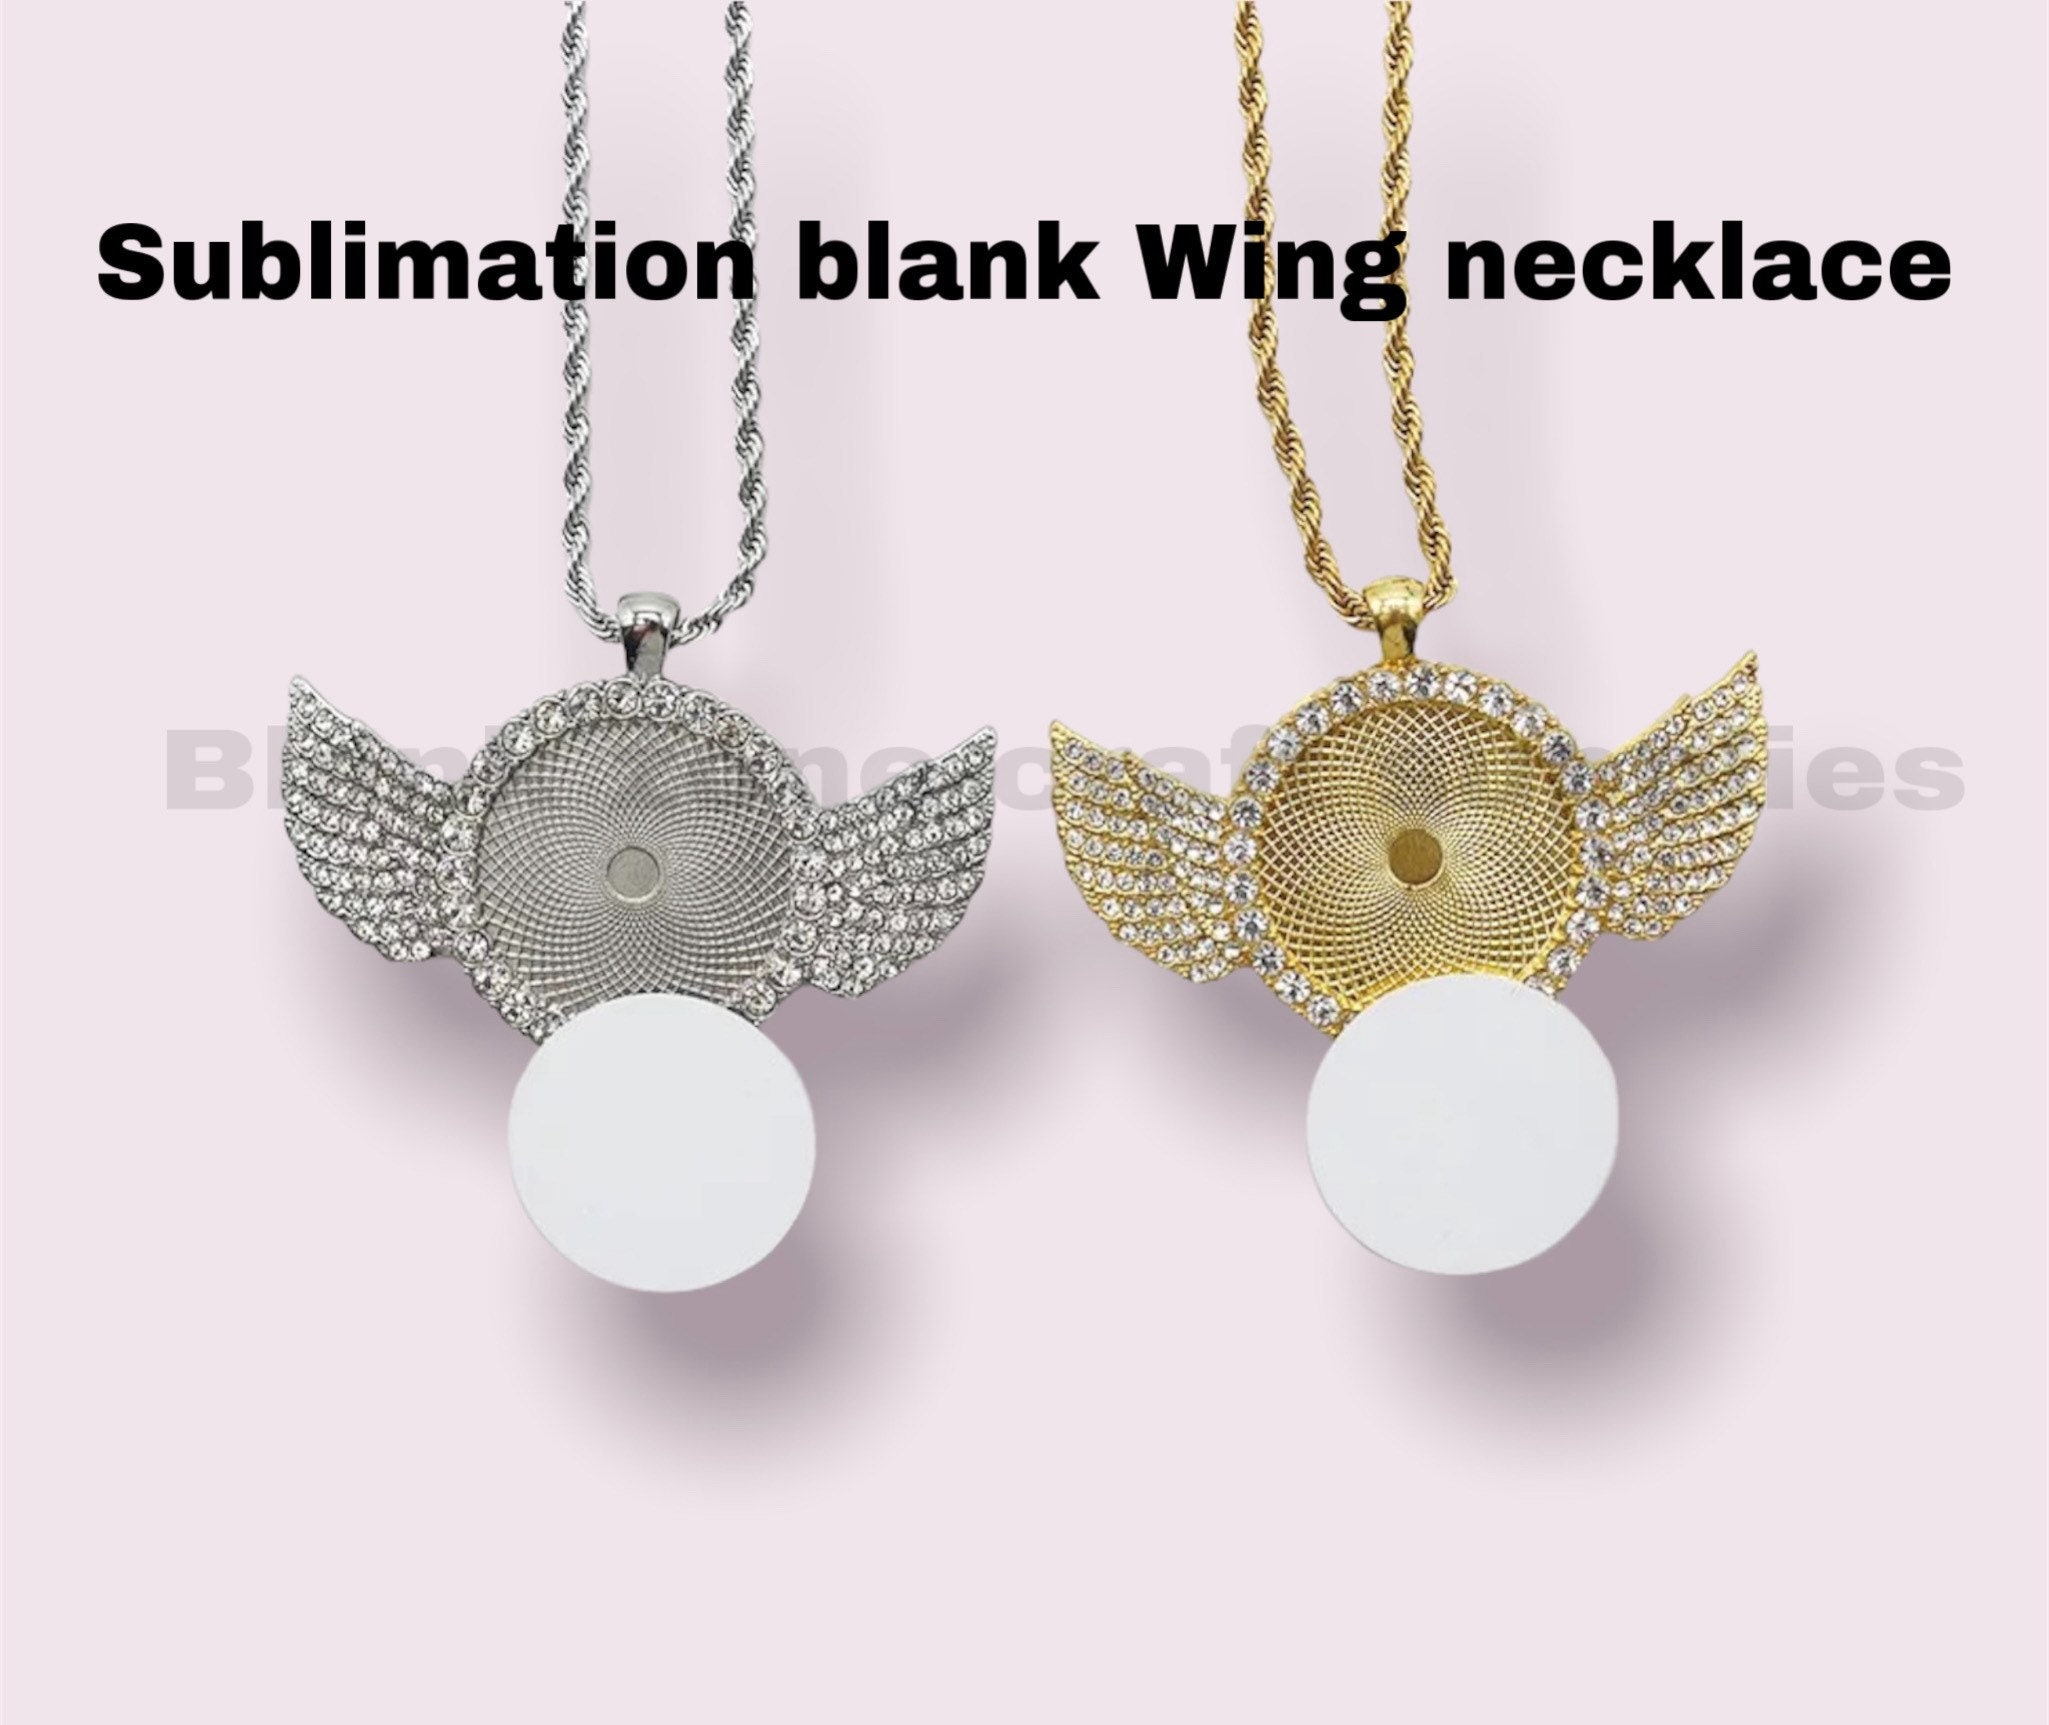 New!! Favor Sublimation Necklace Blank With Chain Open Close Photo